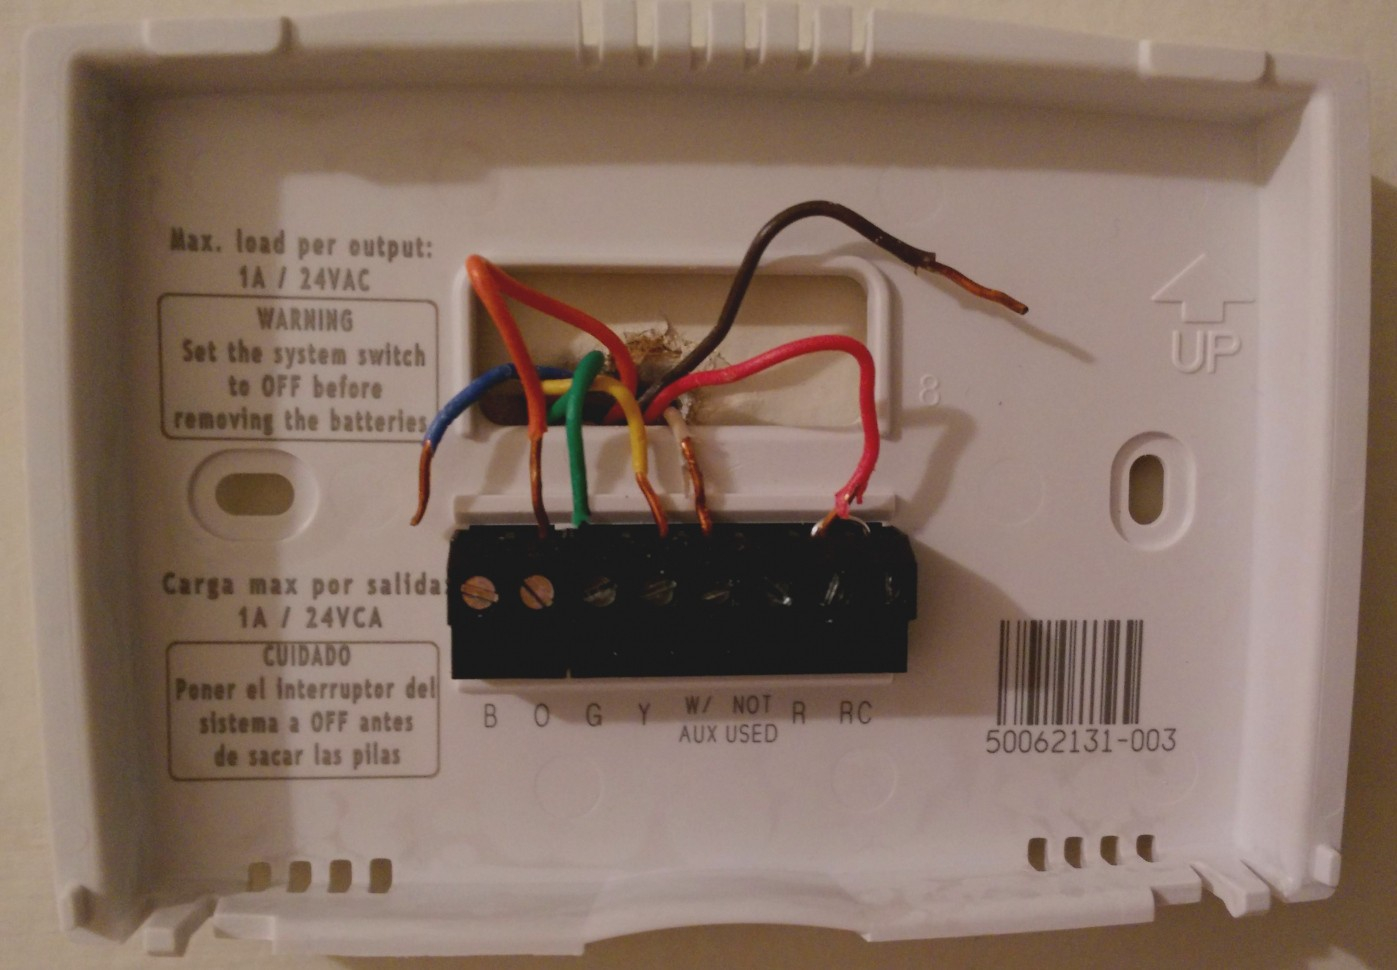 Thermostat Wiring Diagram Wiring A Honeywell Room Thermostat Today Diagram Database